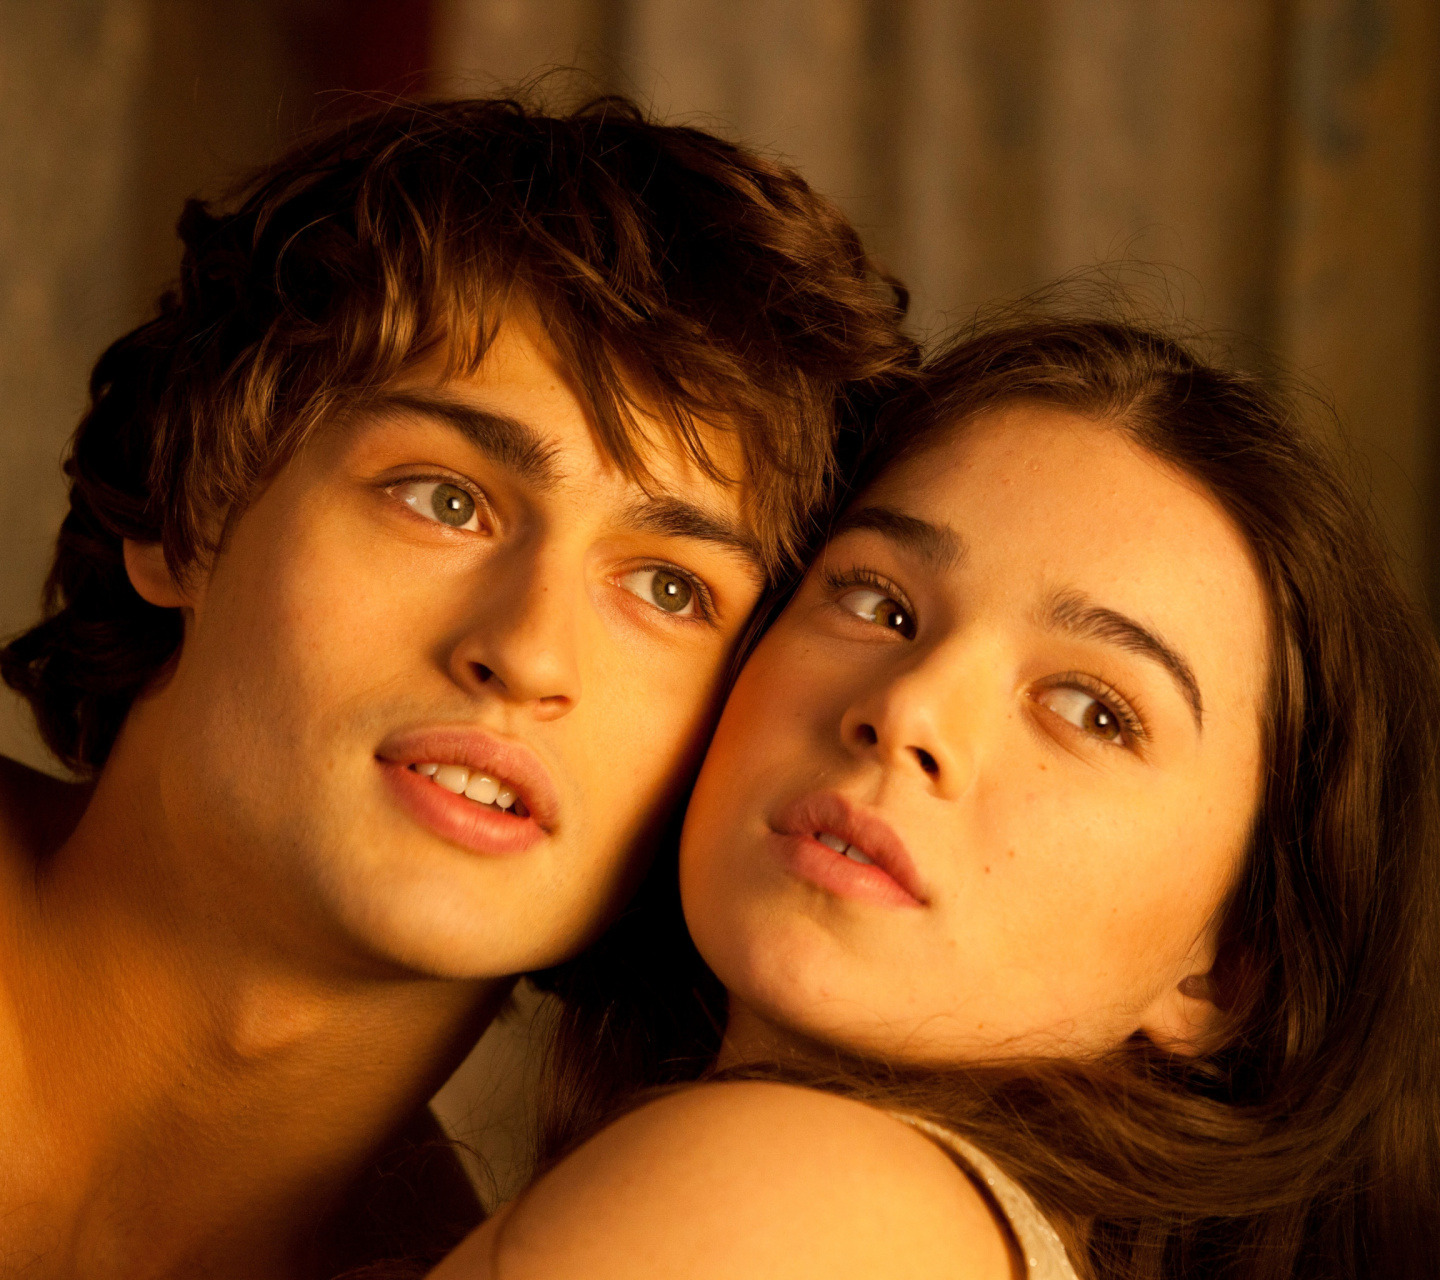 Das Romeo and Juliet with Hailee Steinfeld and Douglas Booth Wallpaper 1440x1280